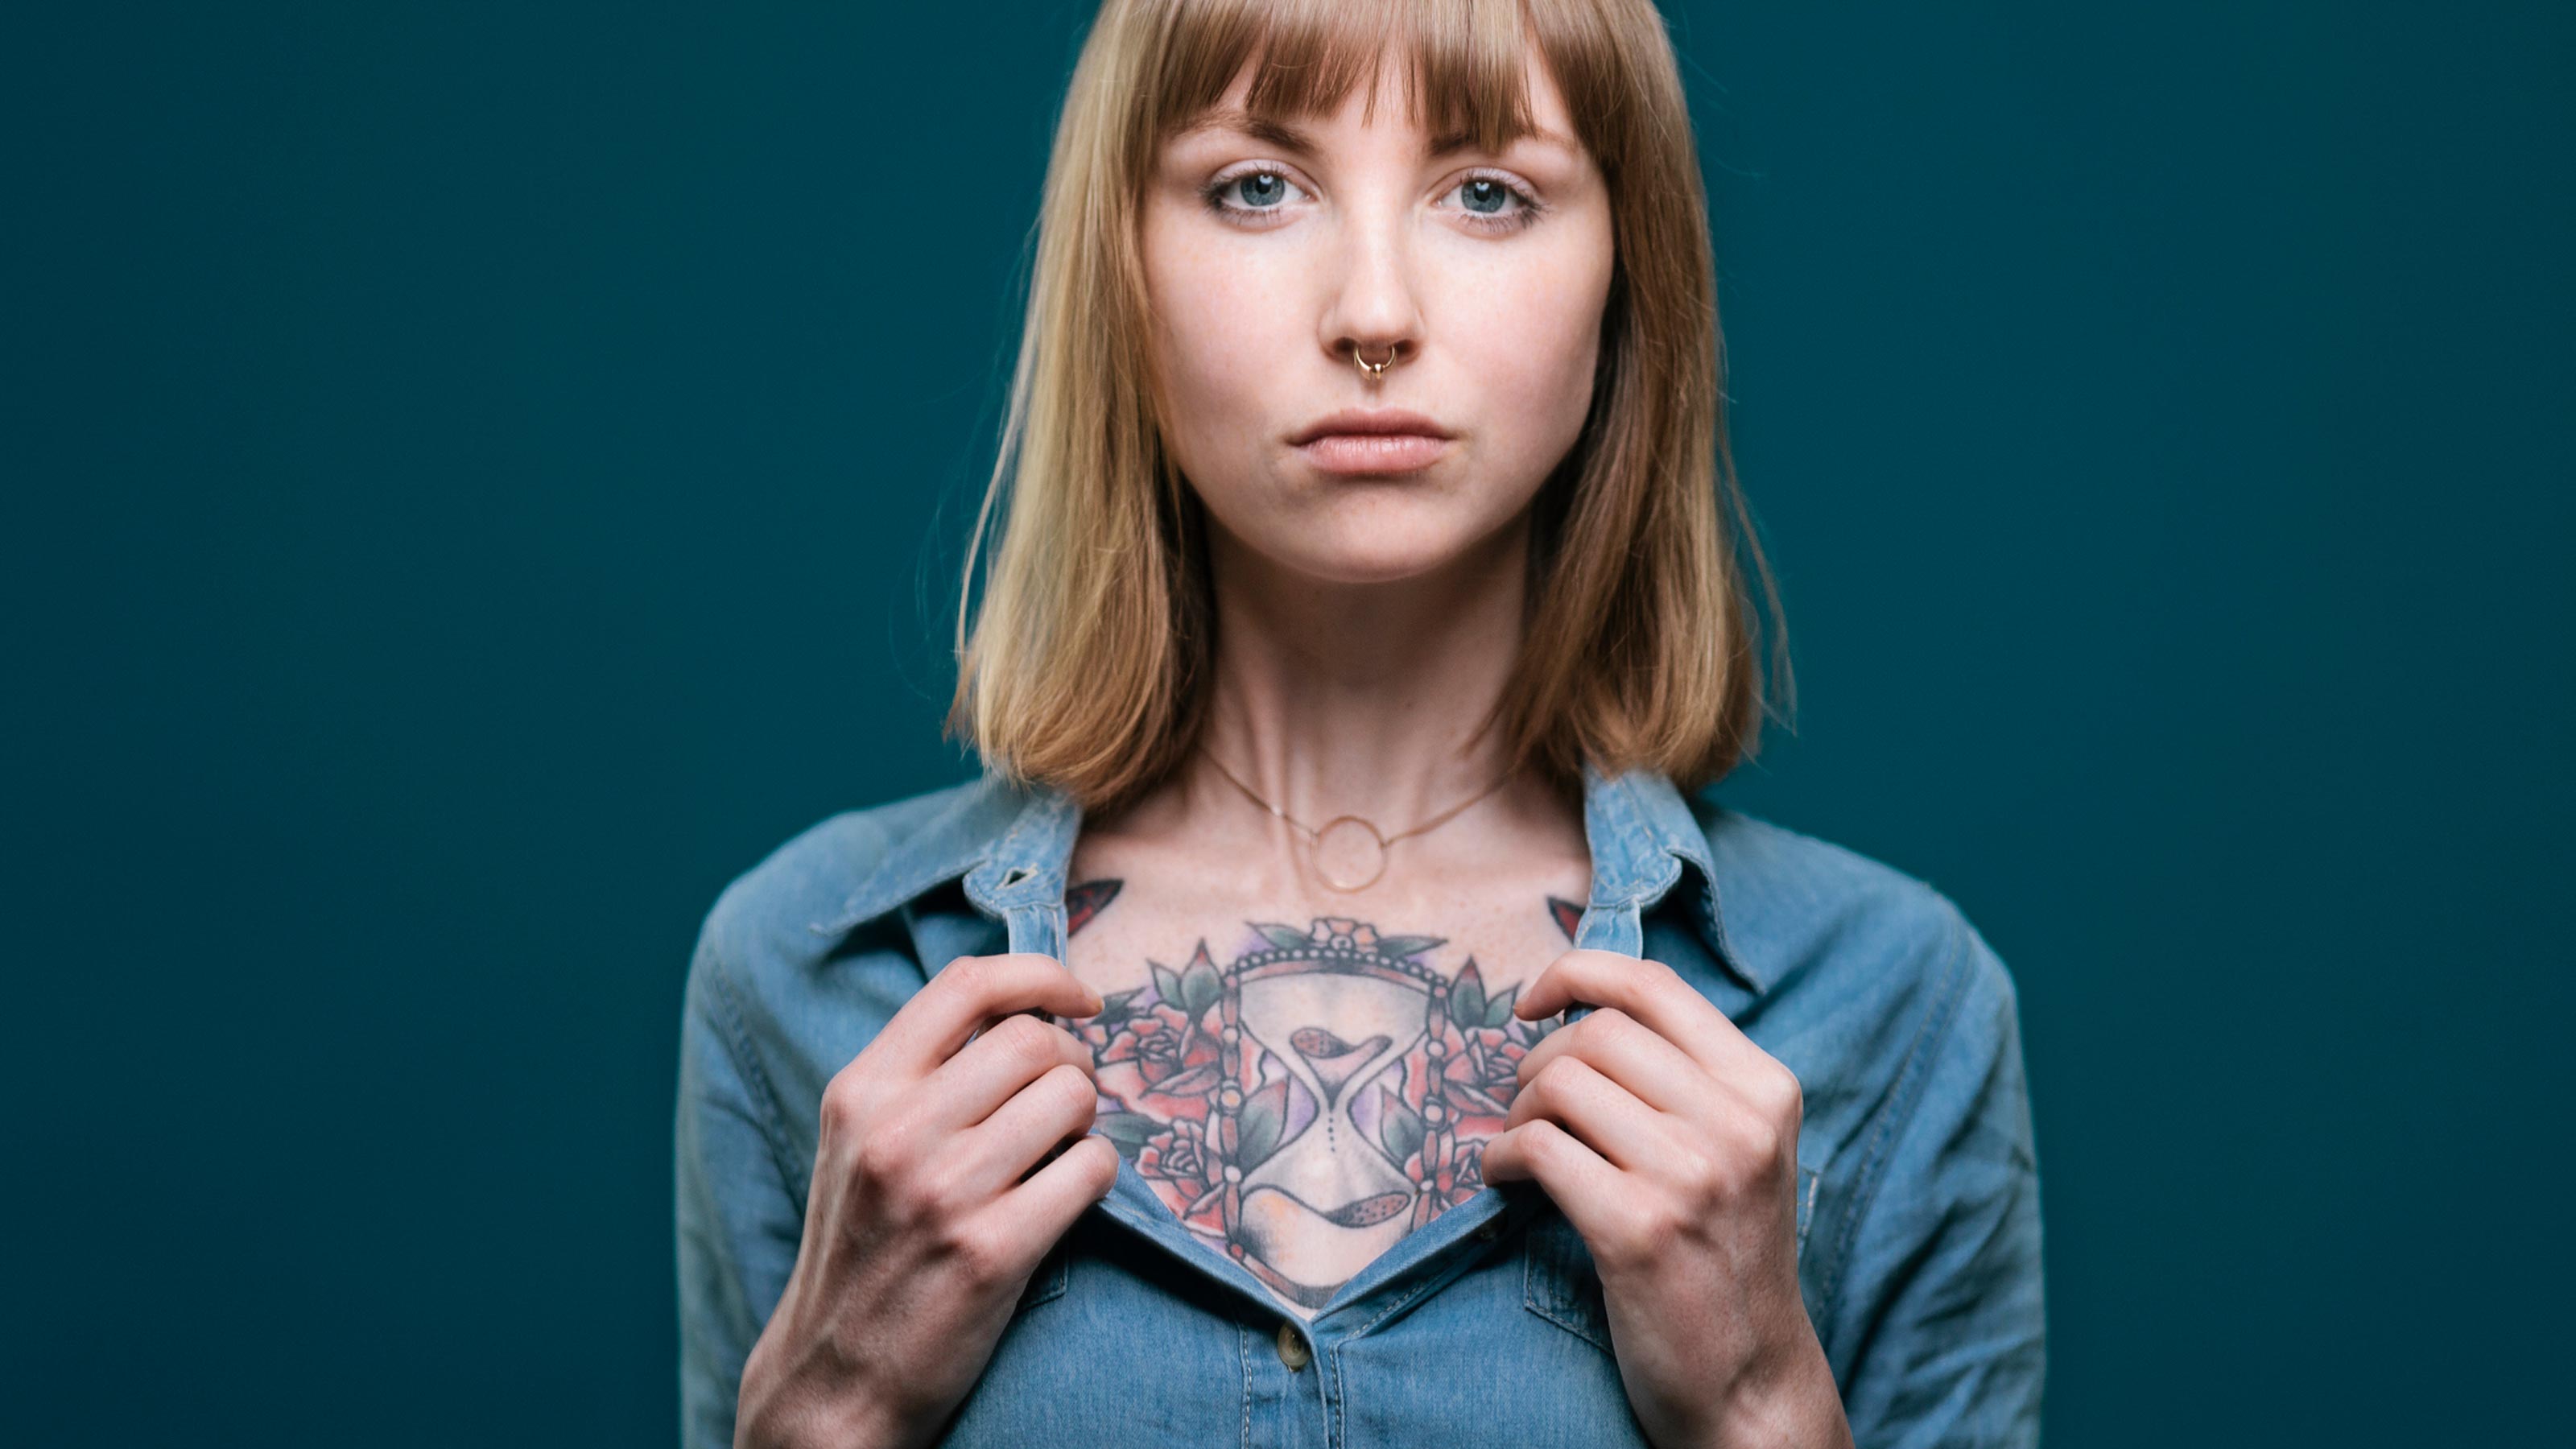 Tattoos and Piercings in the Workplace: Can You Be Fired? | Kiplinger